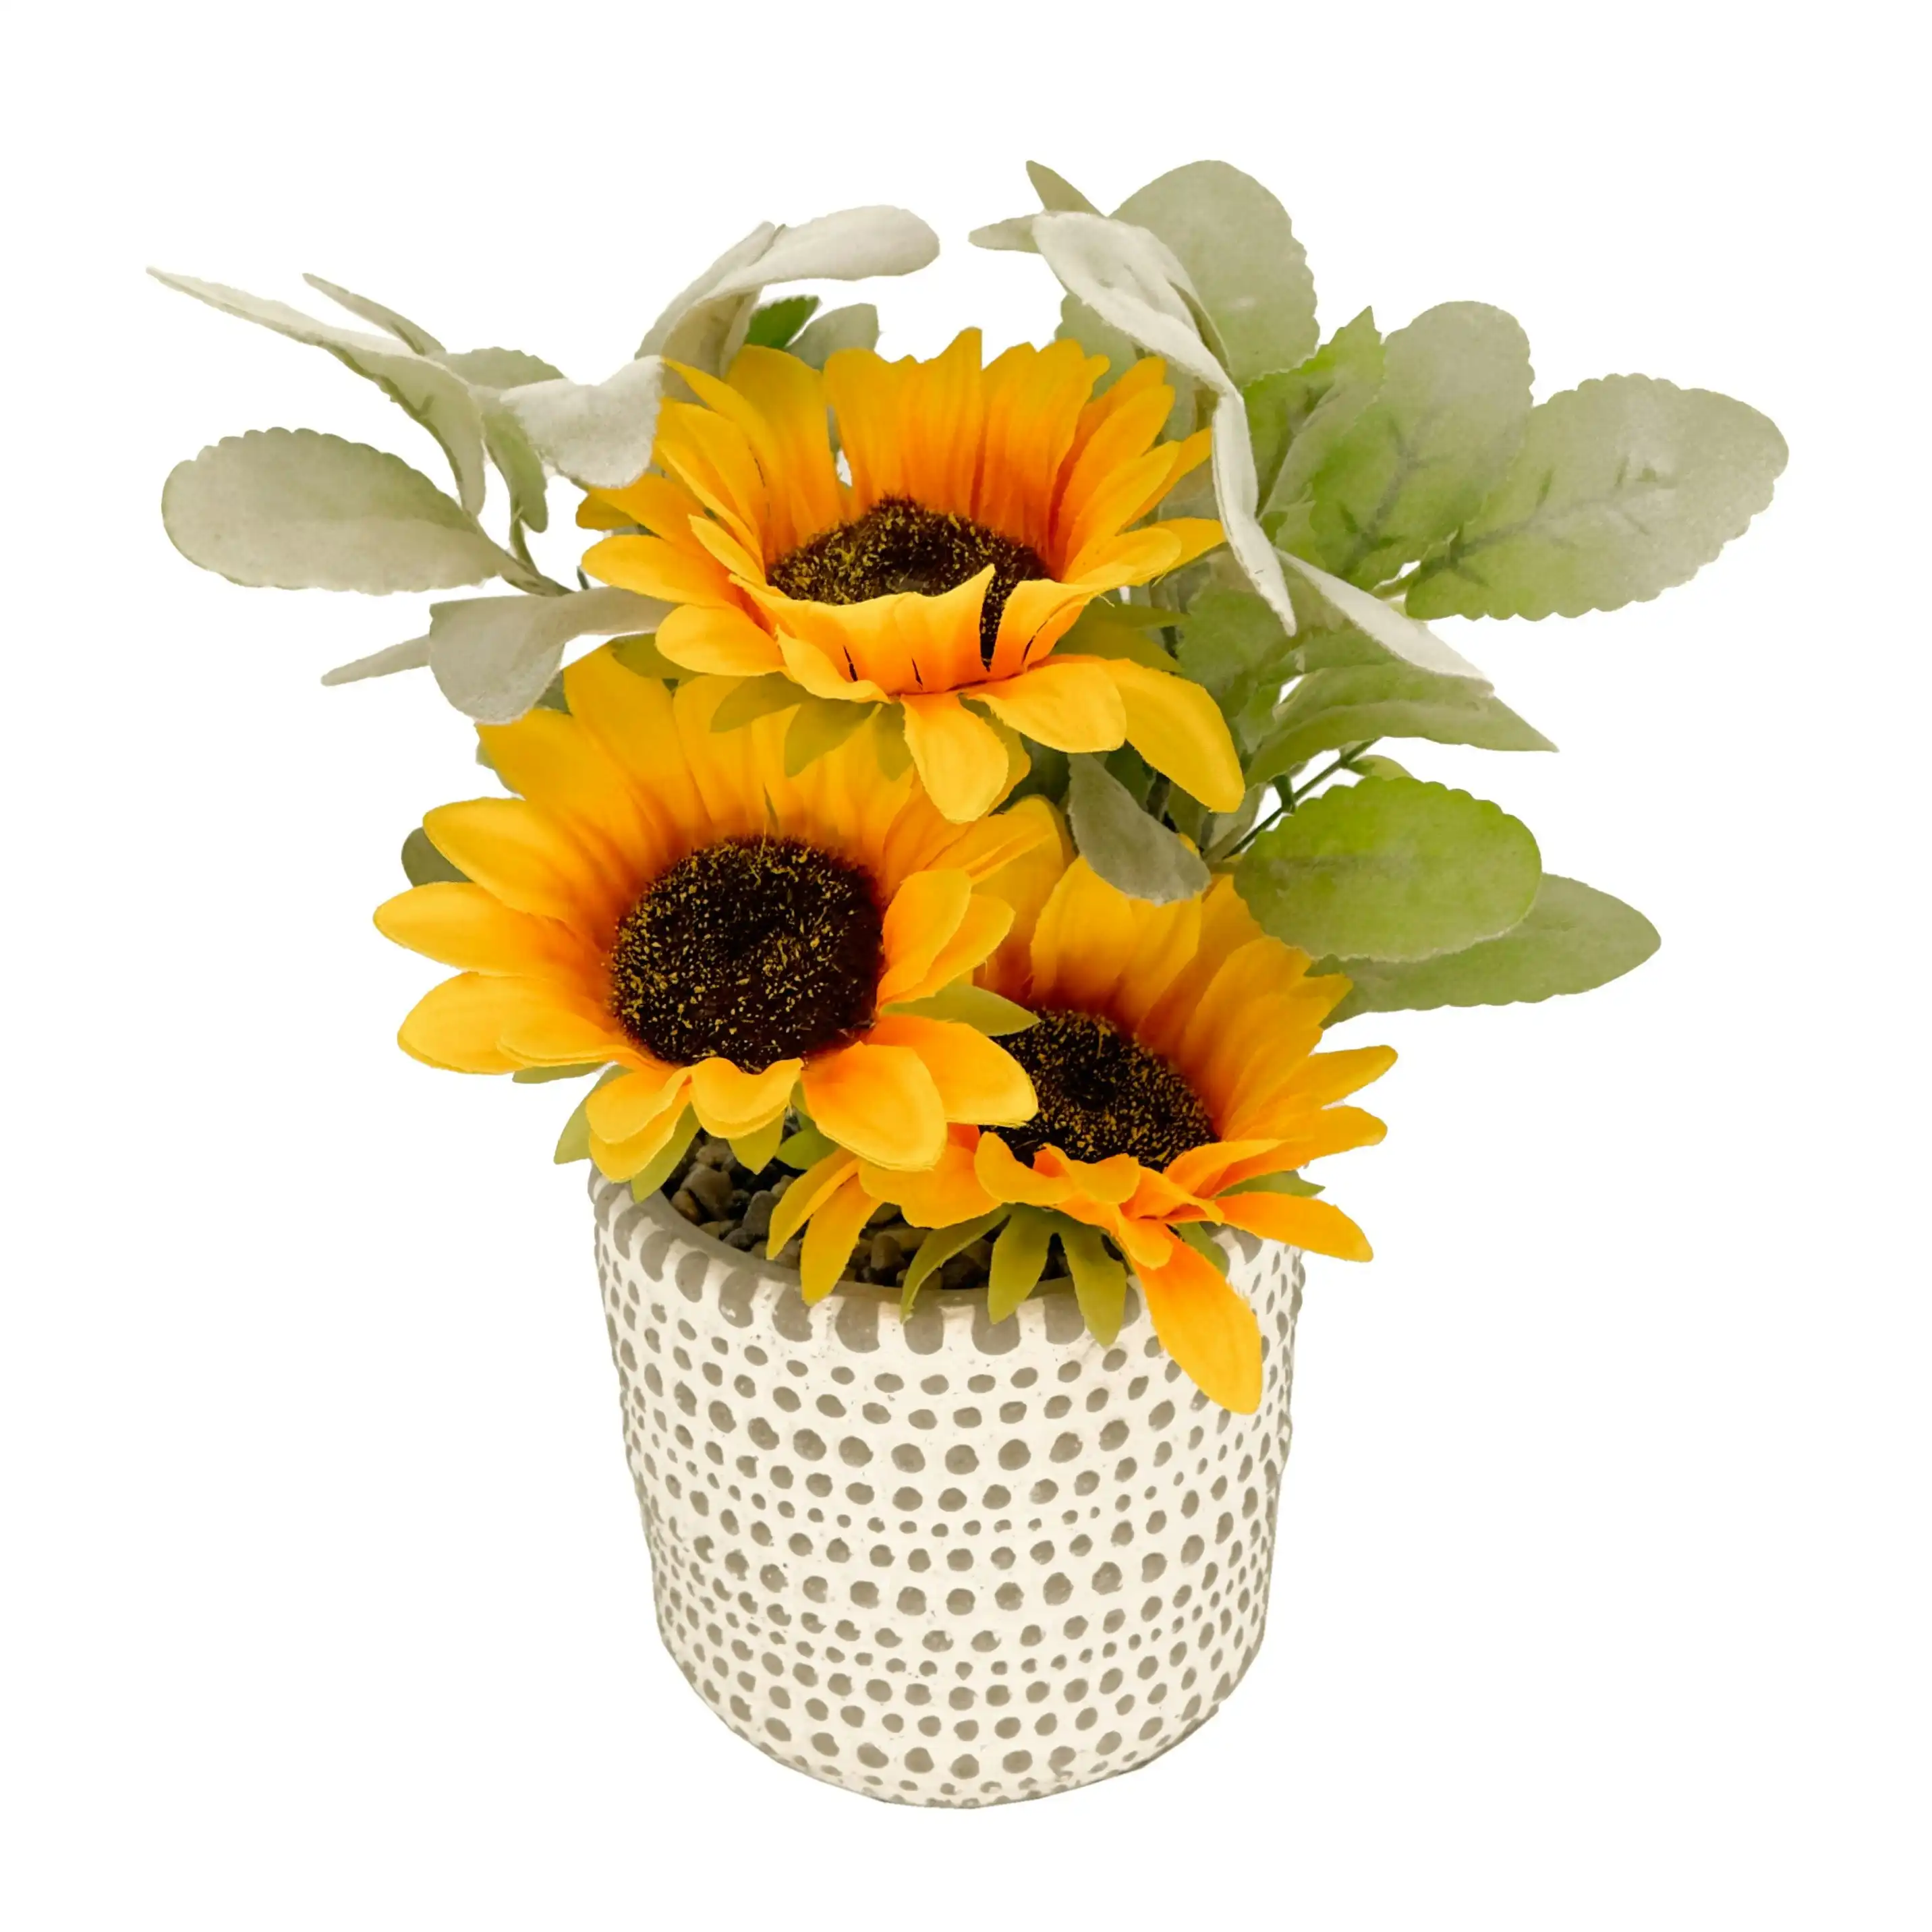 Artificial Plant - Potted Sunflowers 28cm